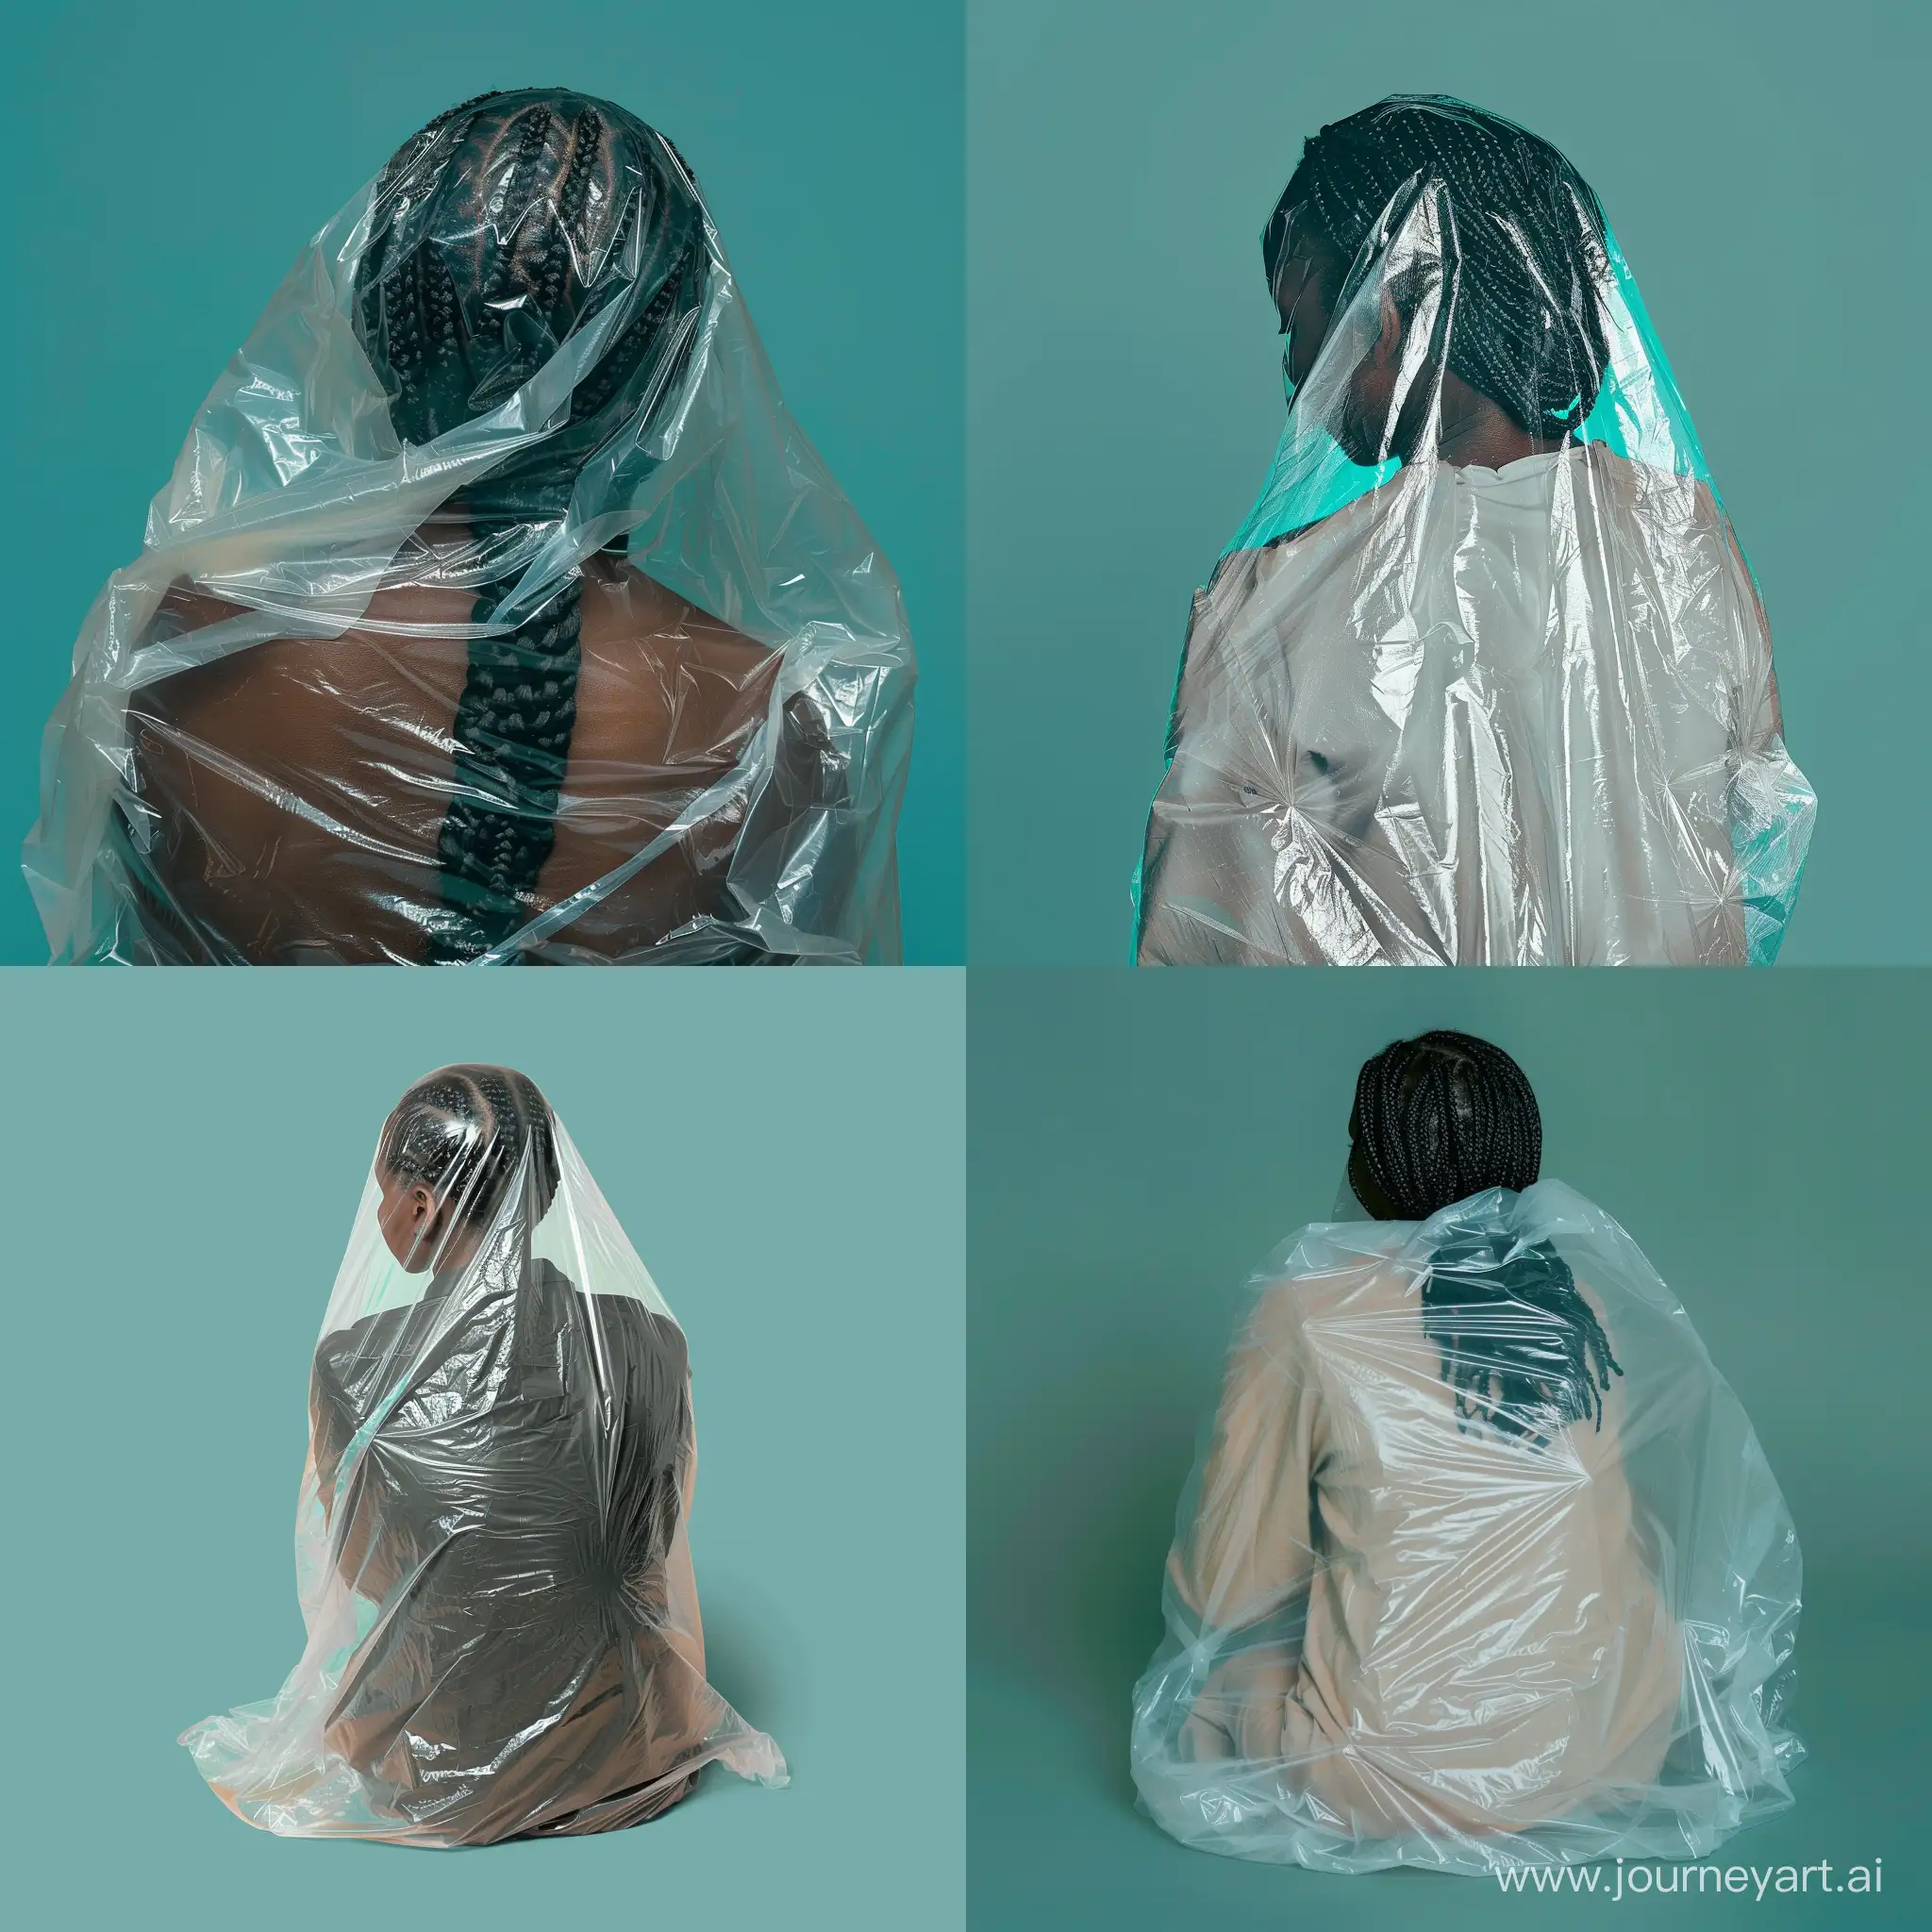 African woman covered in a clear draped plastic bag. She is facing down and she has plaited hair. Her body is facing the front camera view. The background is teal in color.